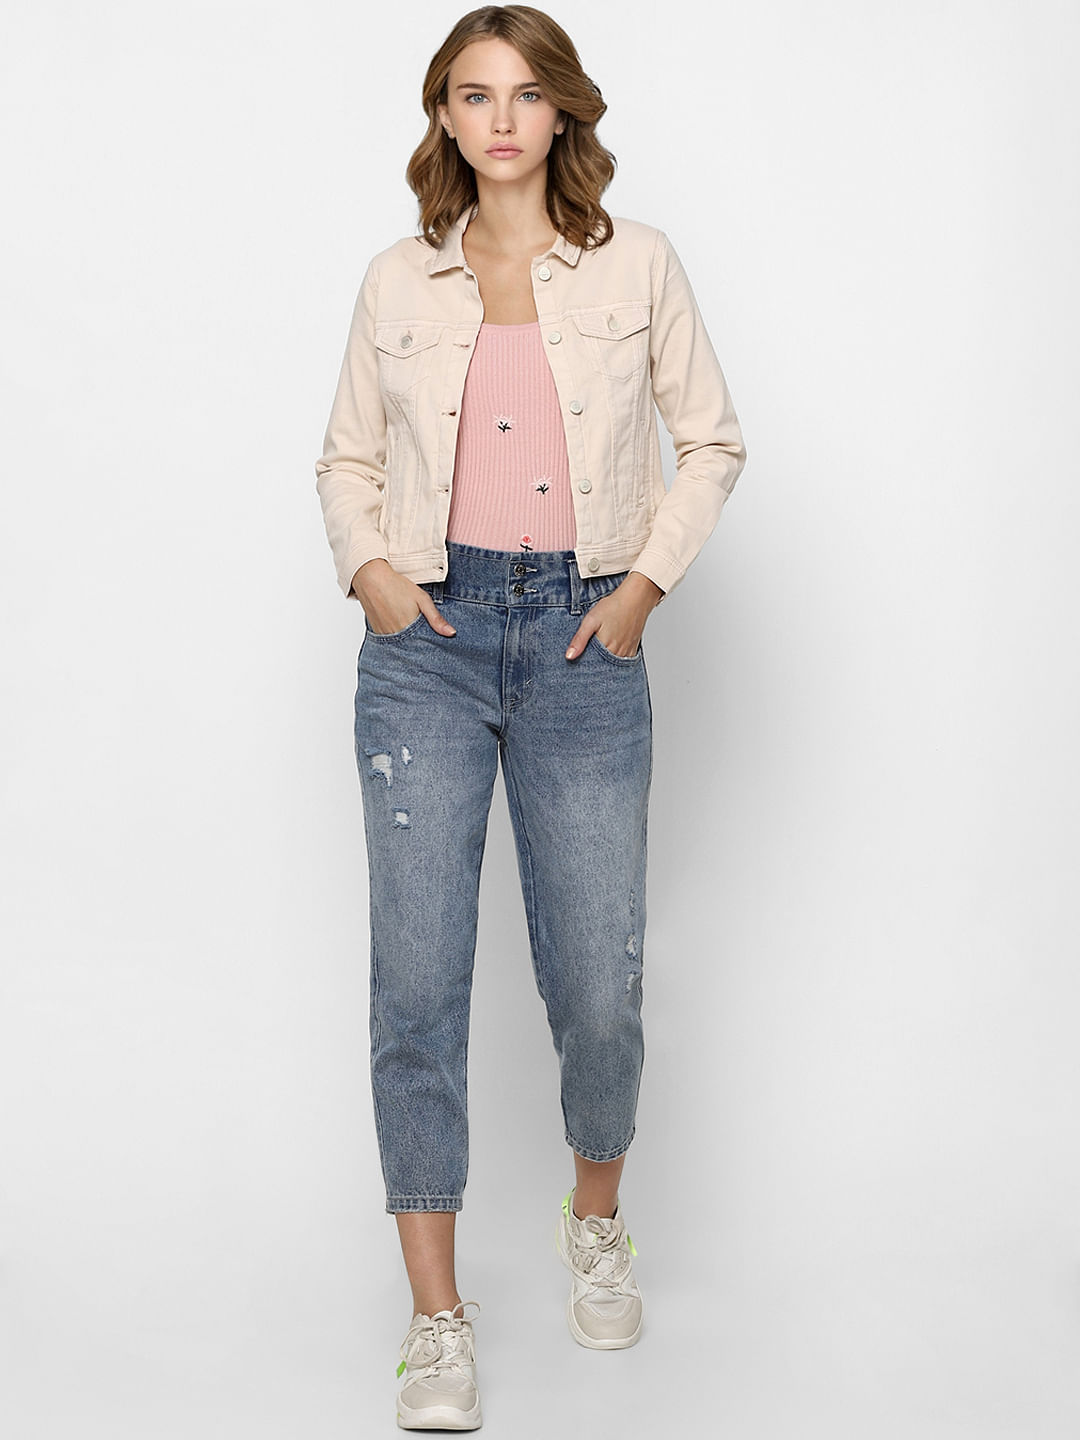 Roadster Women Pink Pure Cotton Denim Jacket with Floral Embroidery Price  in India, Full Specifications & Offers | DTashion.com